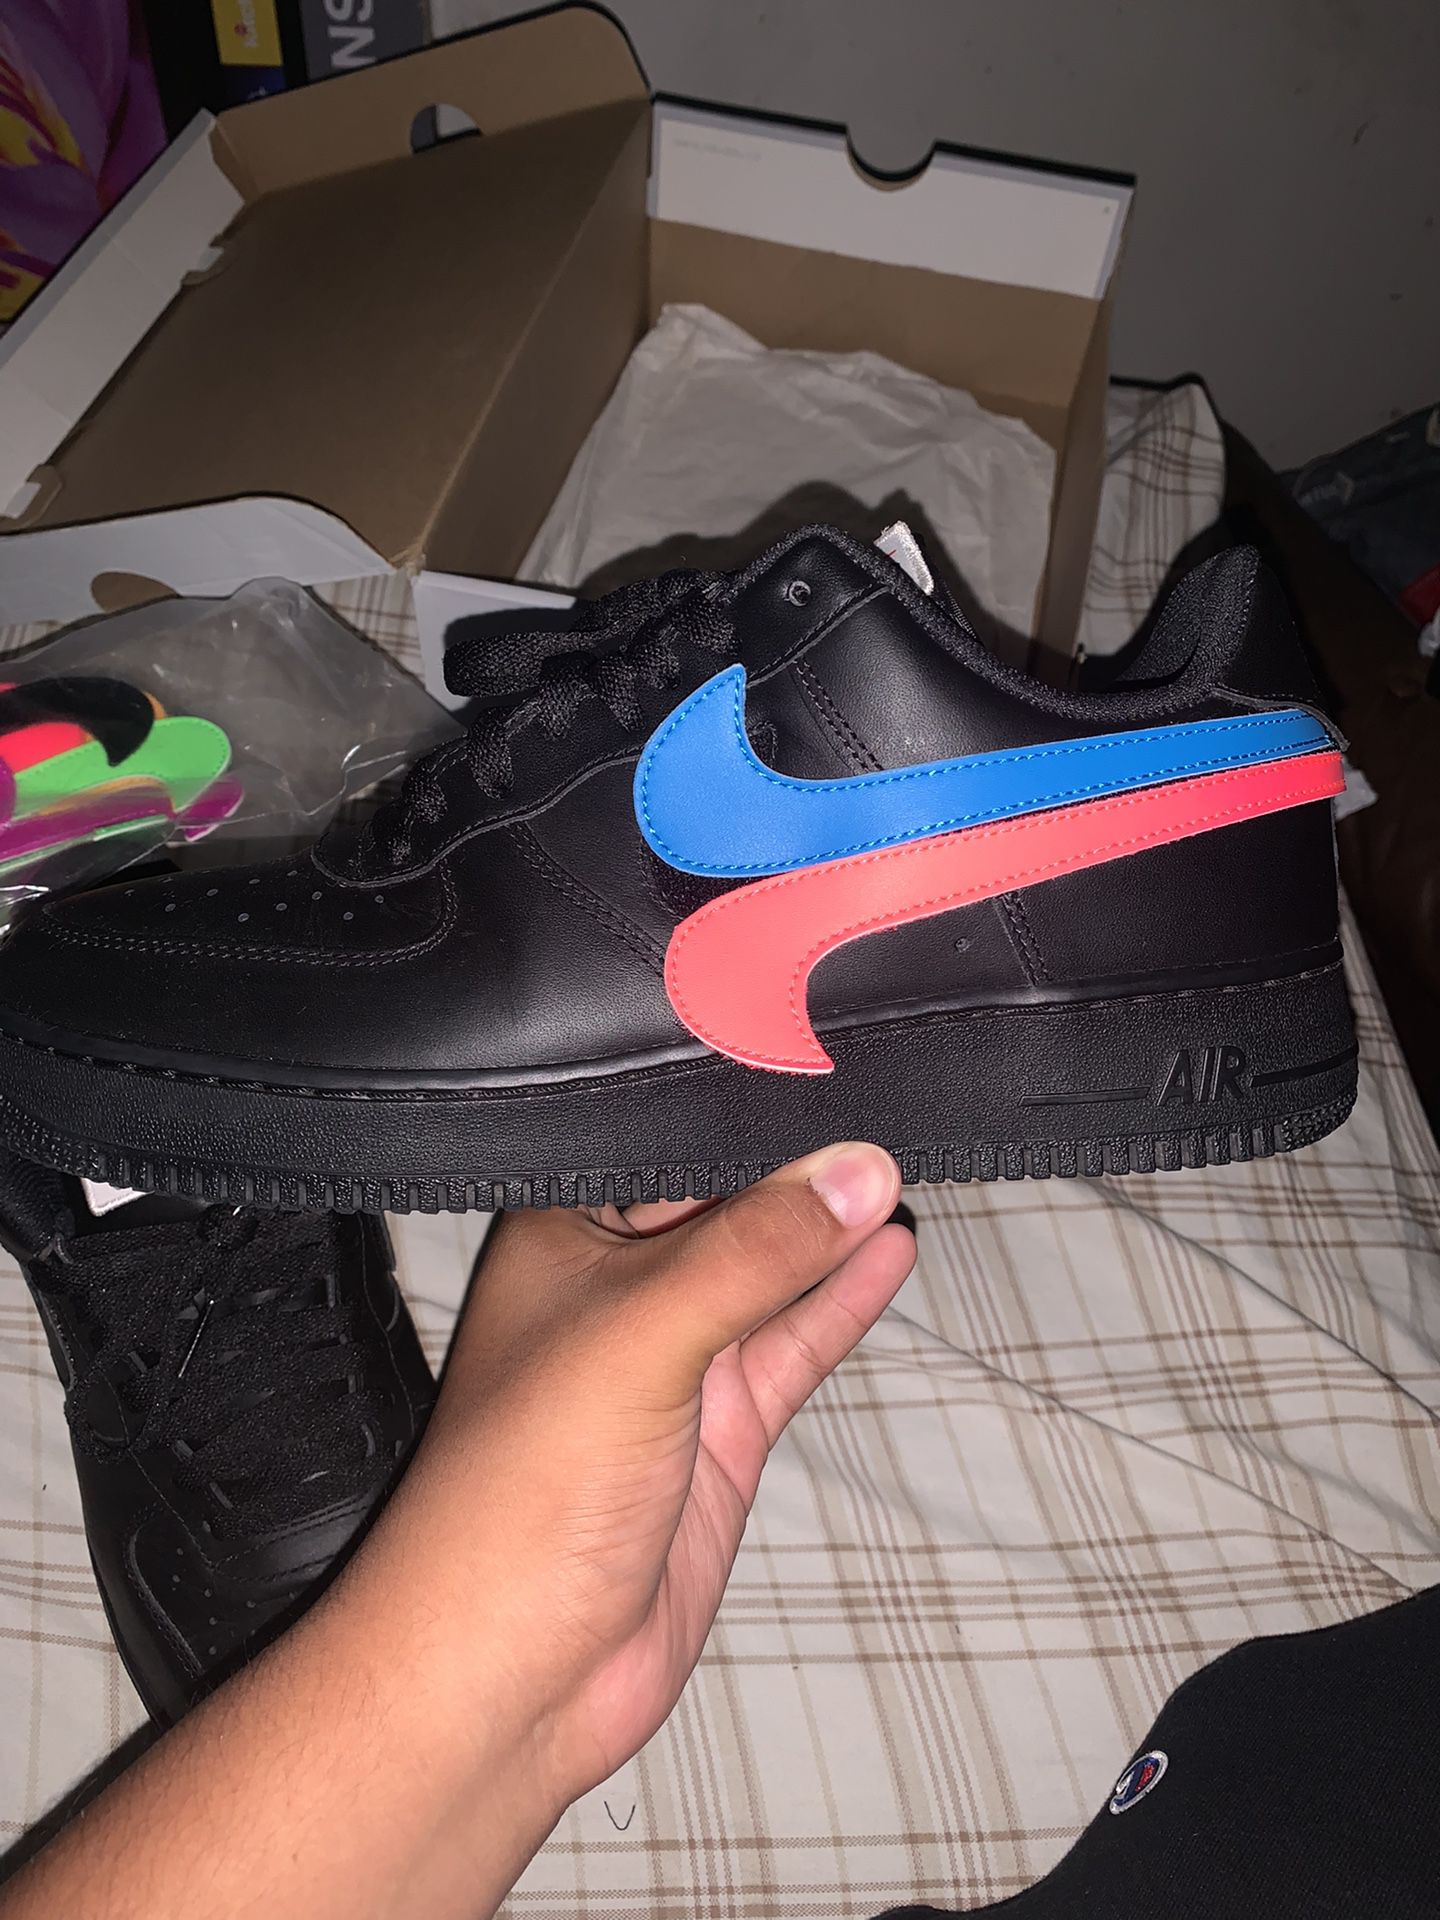 Nike Air force 1 Low Pack - All Black Colorway ACCEPTED for Sale in West Haven, CT -